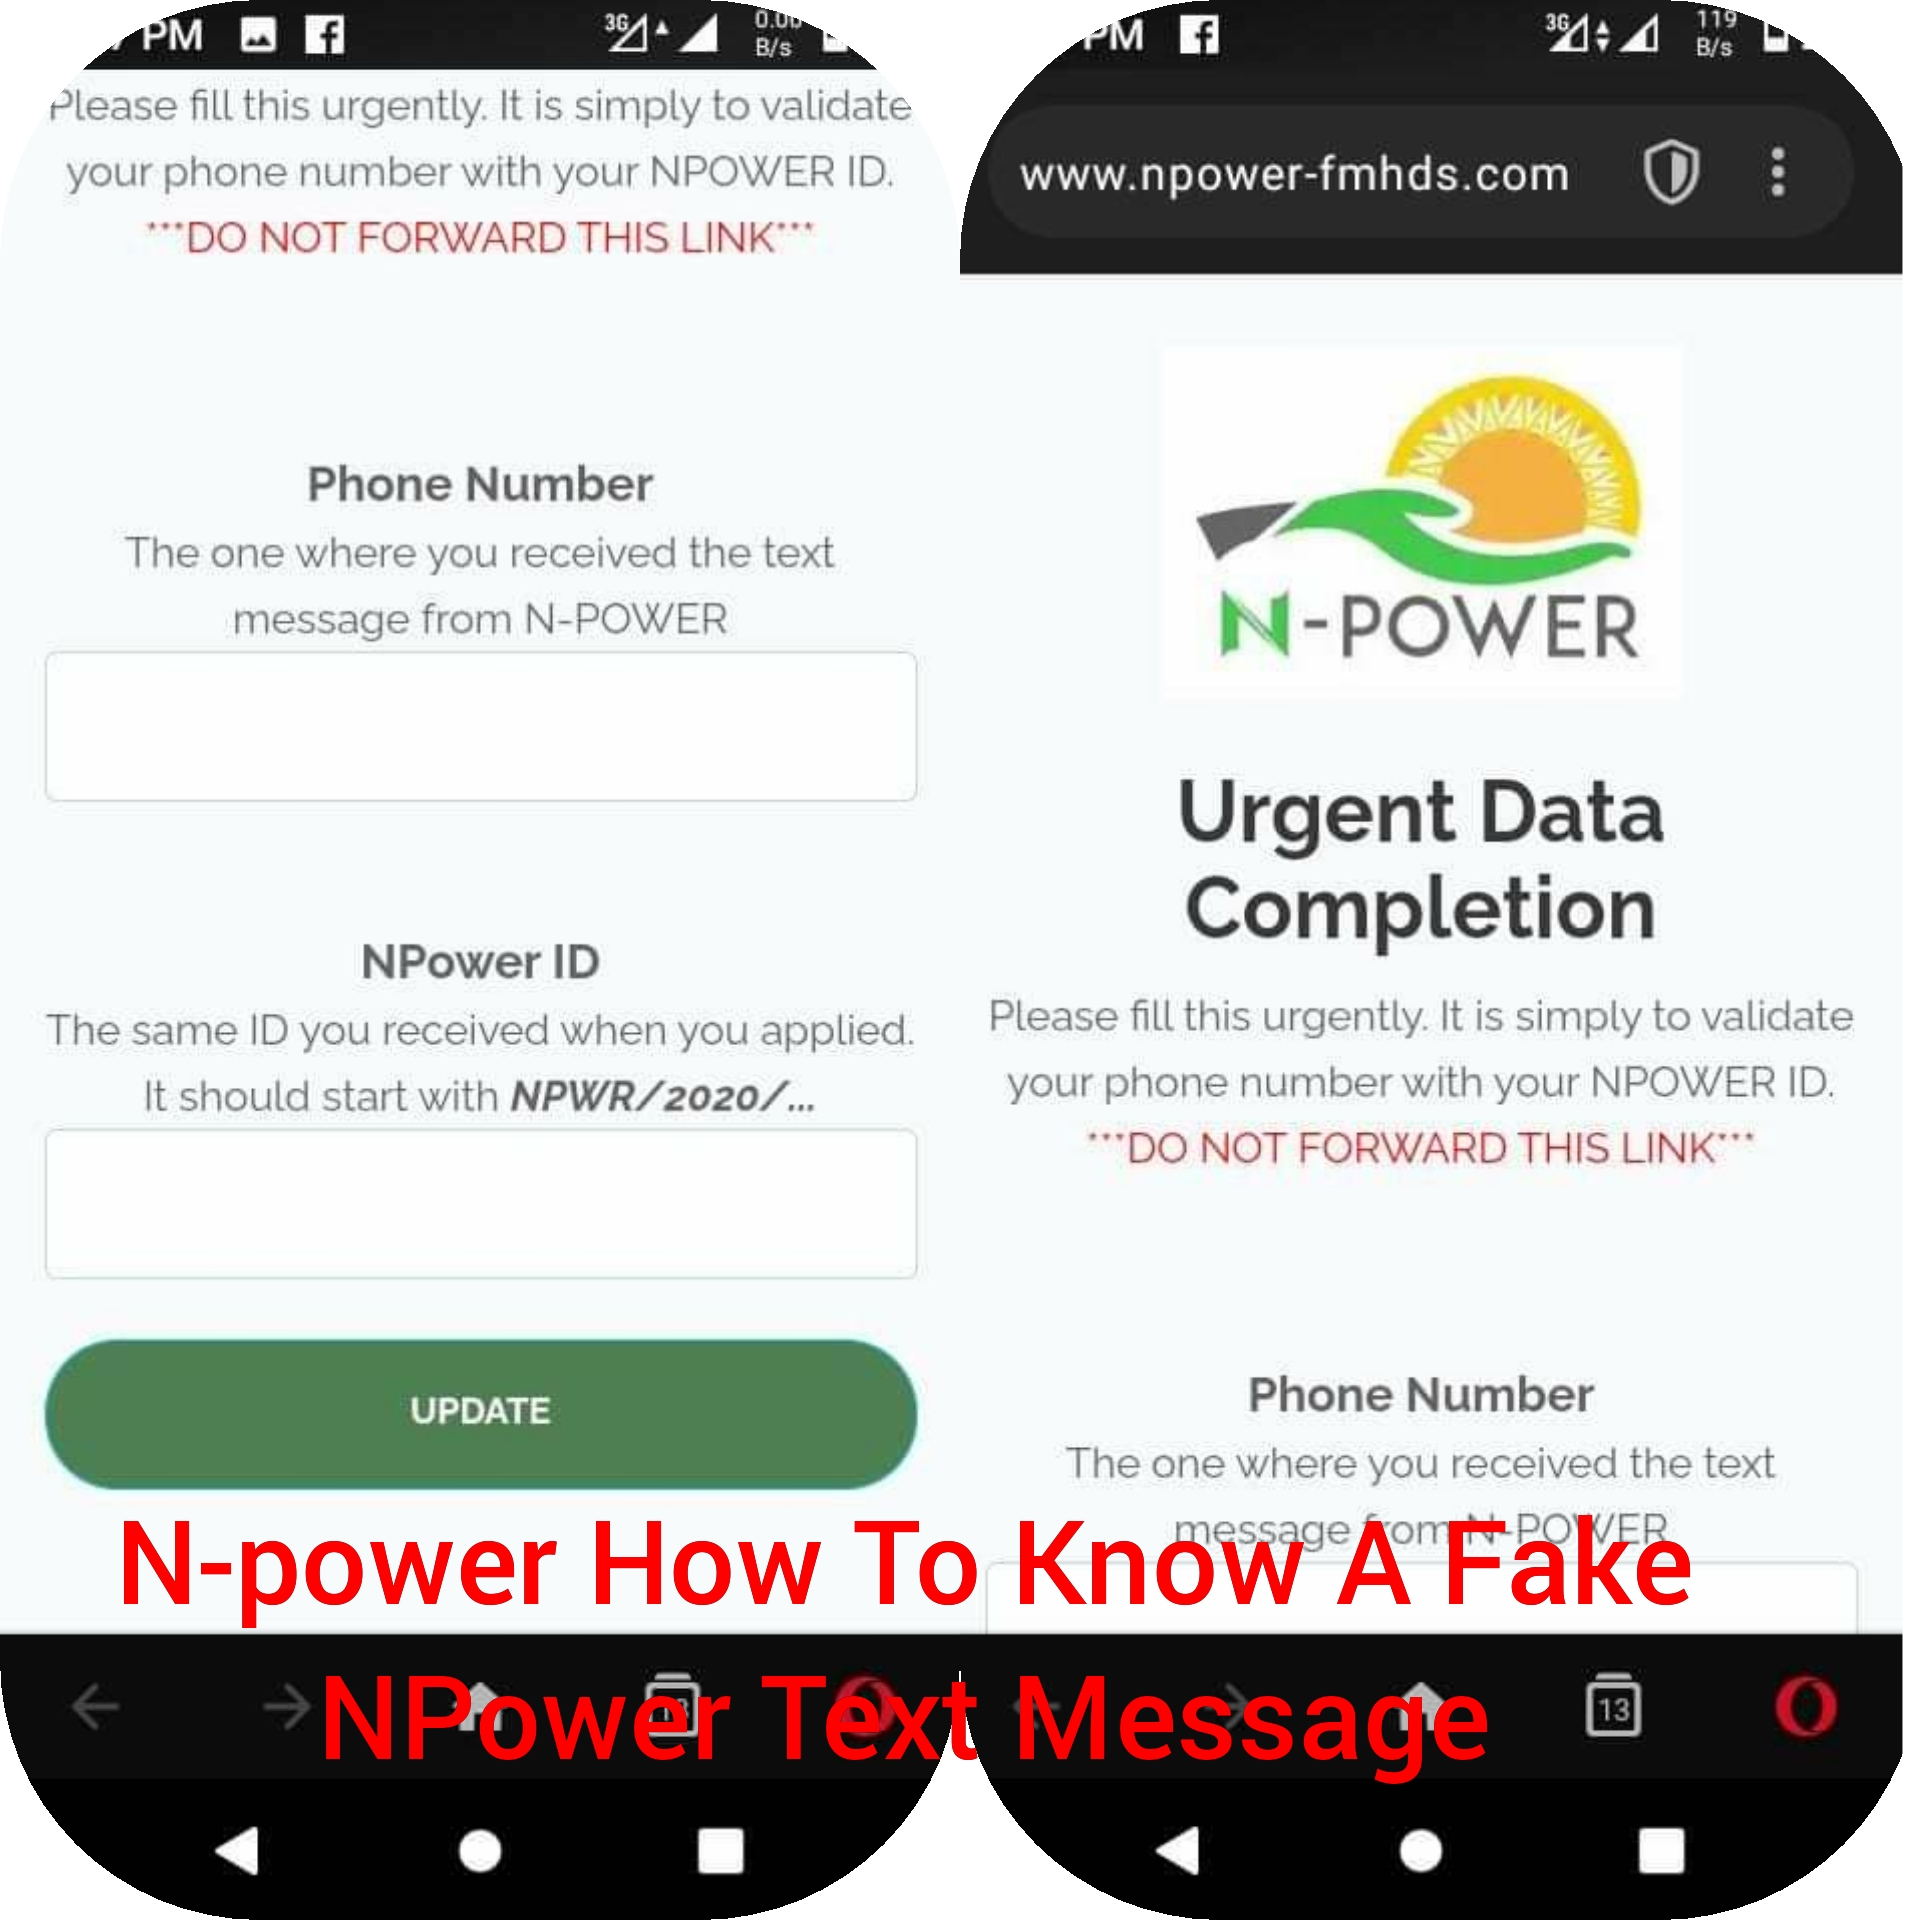 N-power How To Know A Fake NPower Text Message